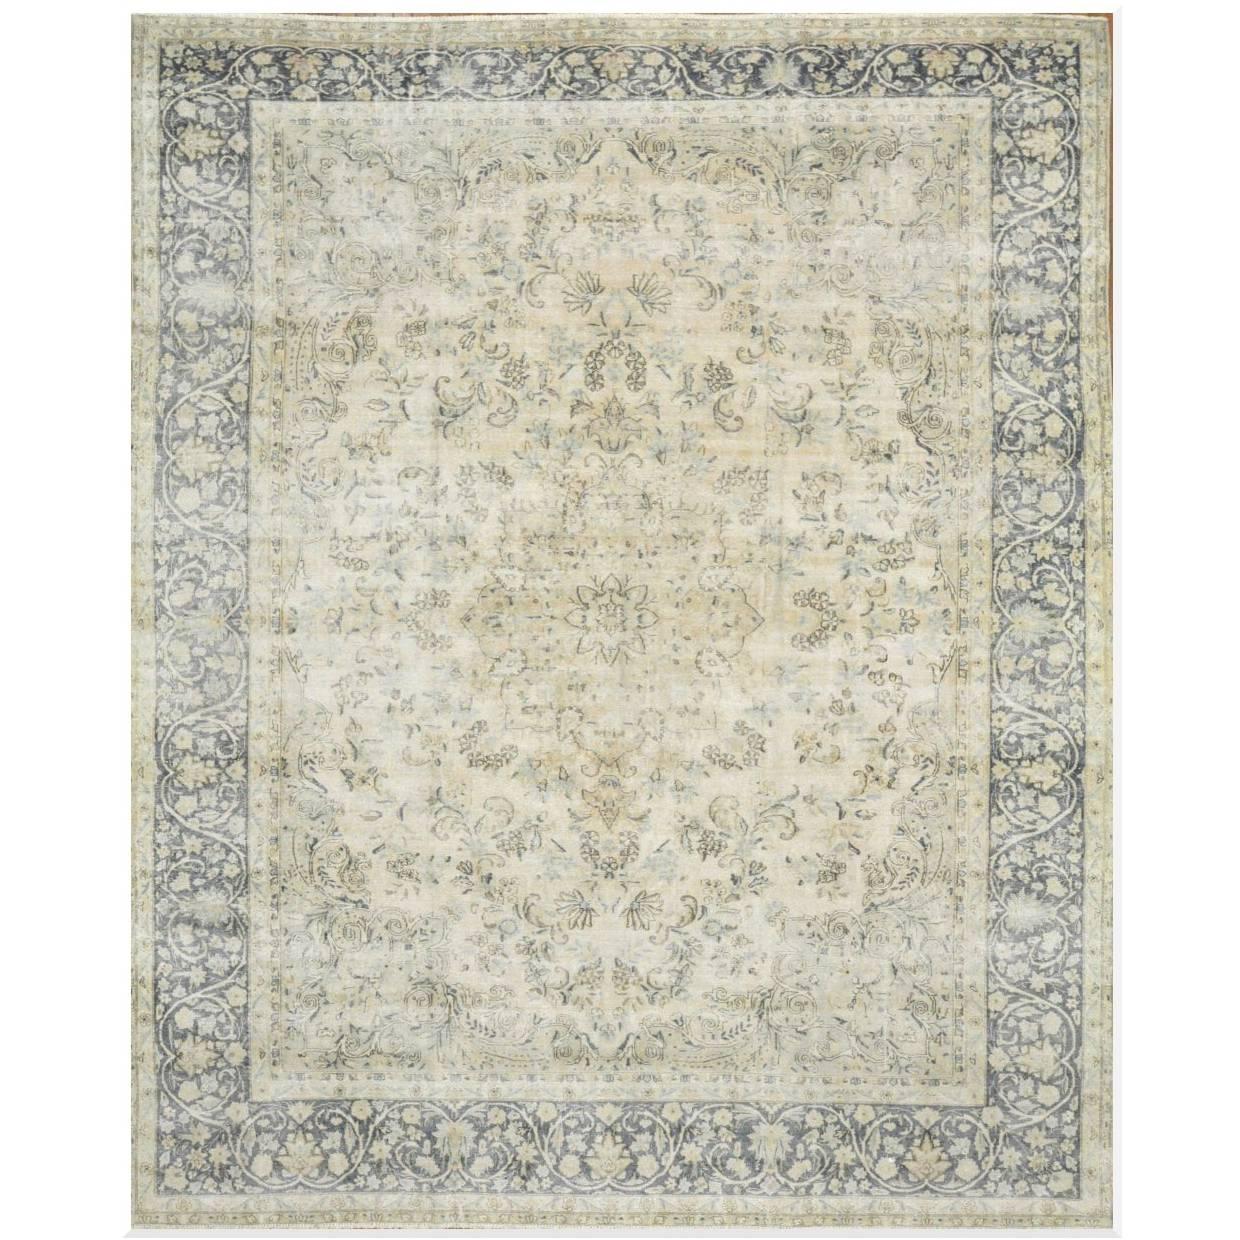 Large Distressed Hand-Knotted Persian Kerman Rug